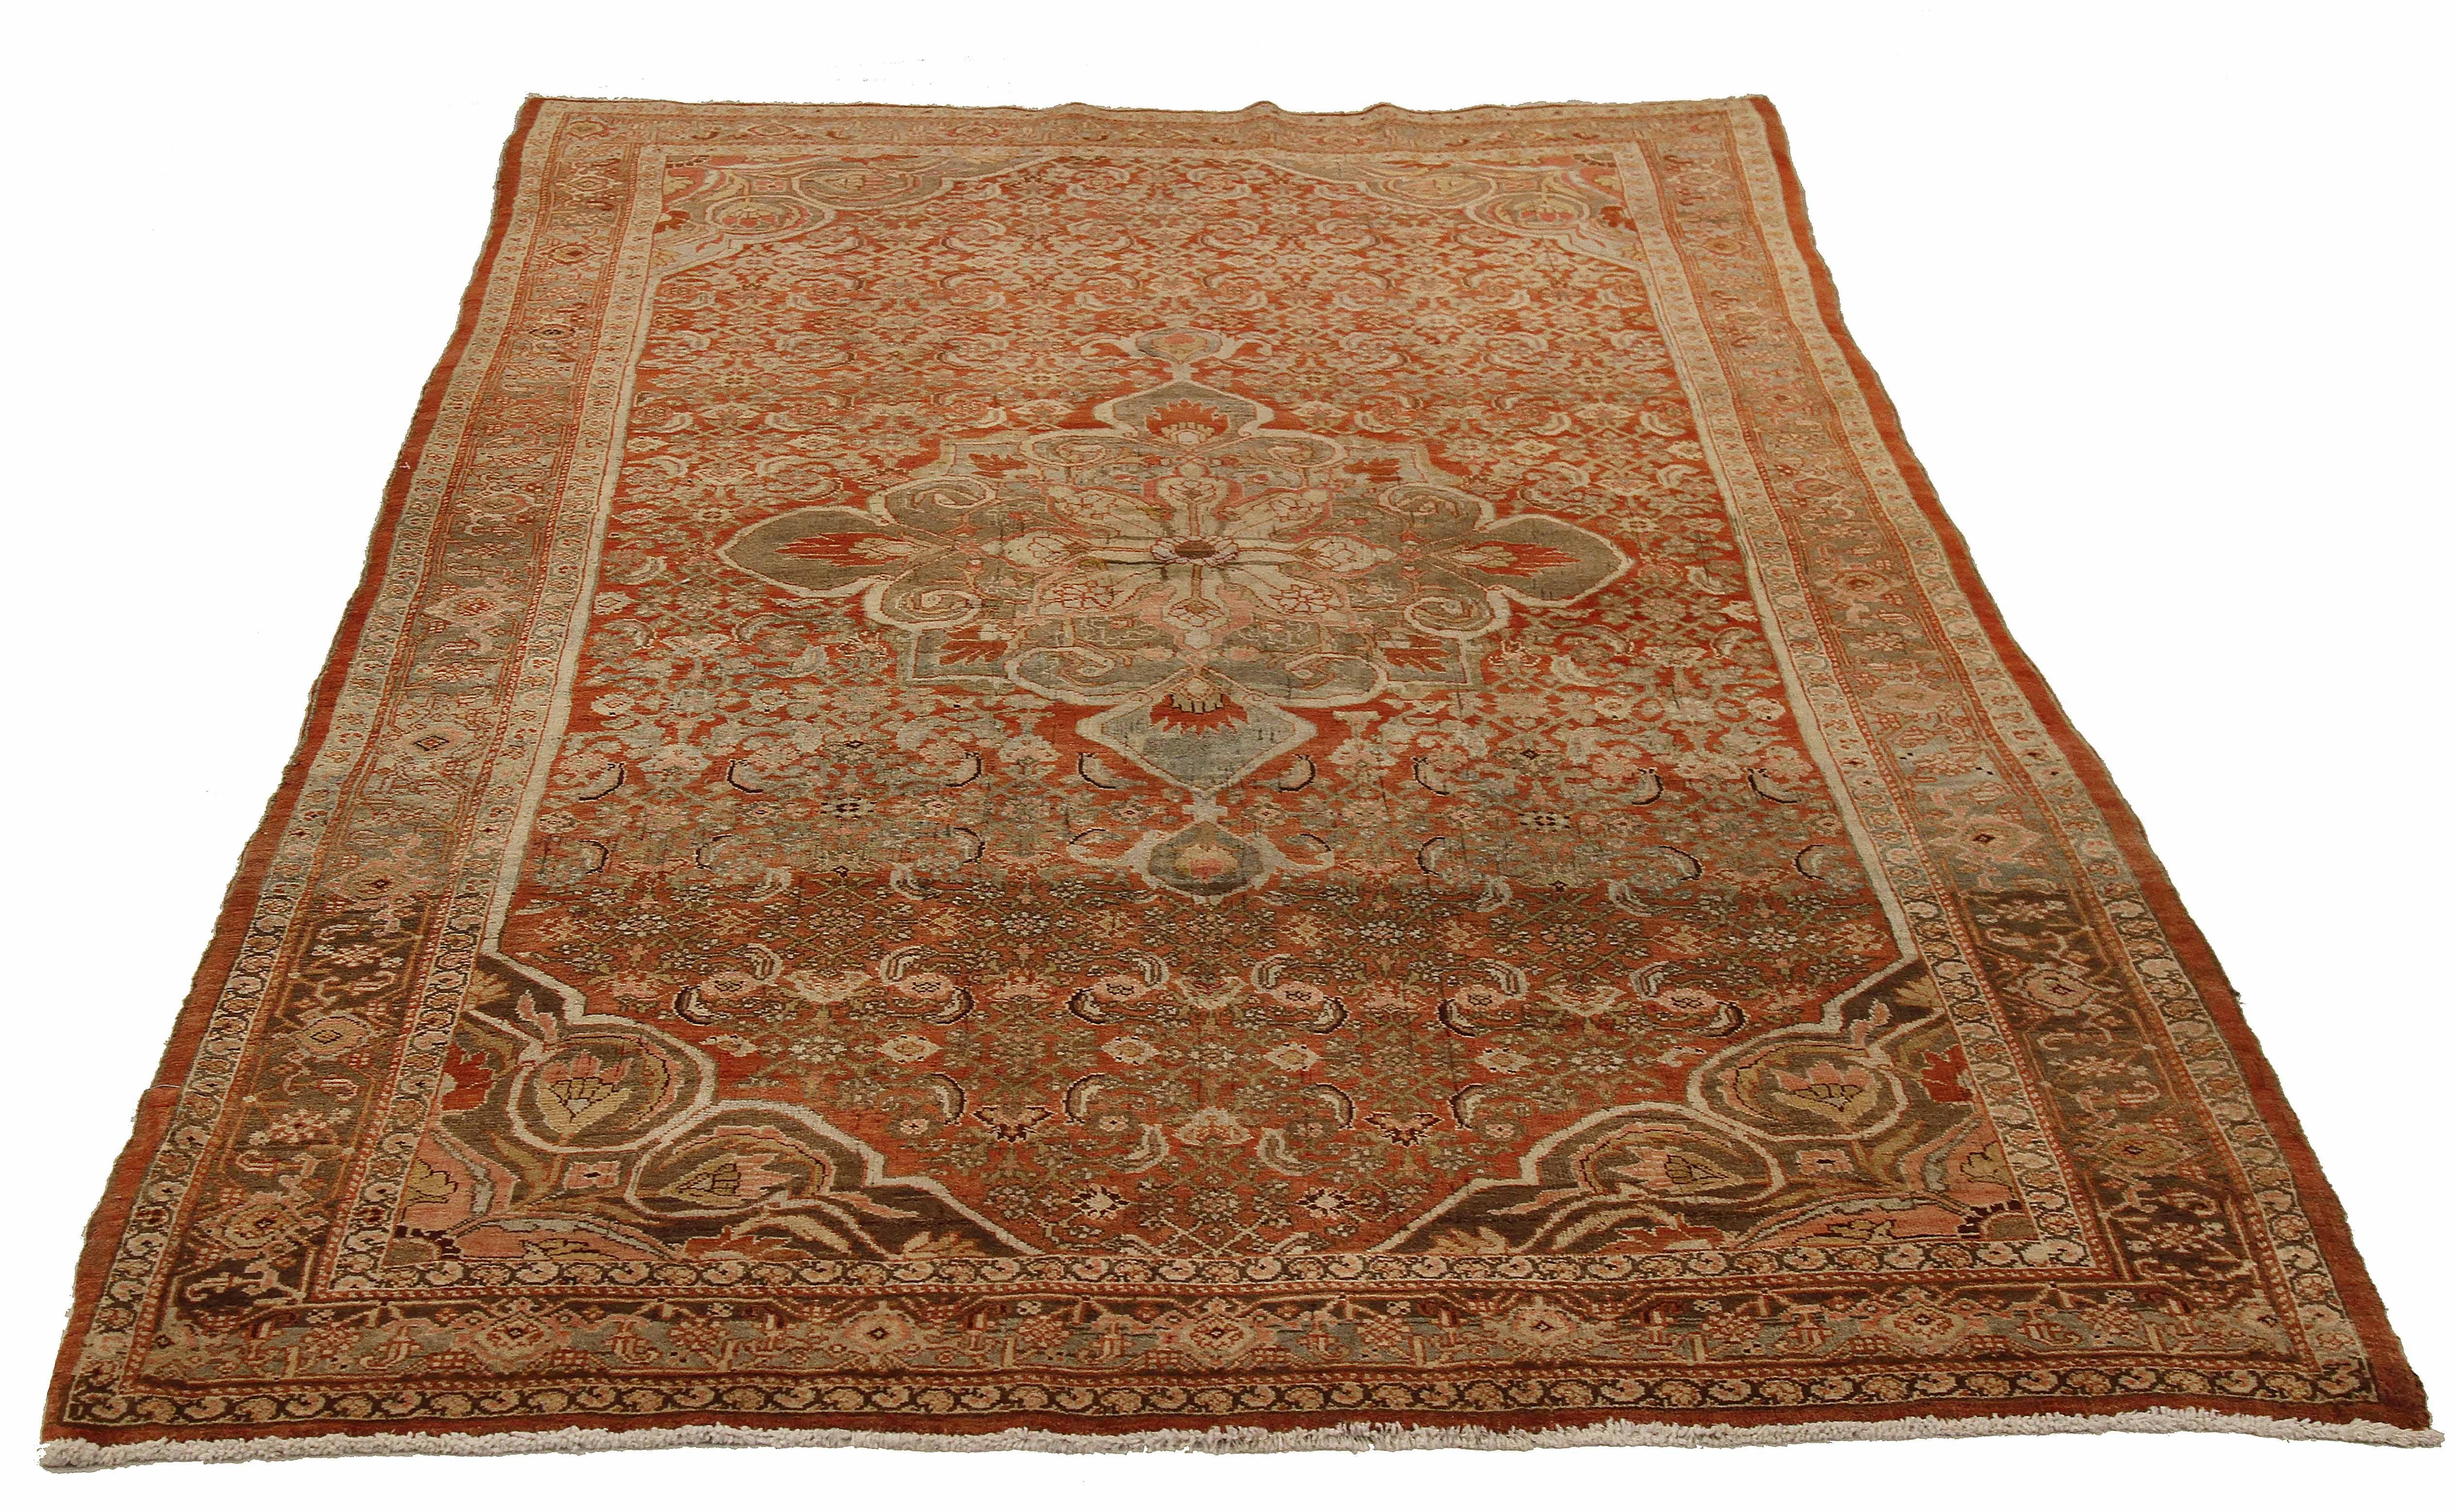 Antique Persian Area Rug - Handwoven with Premium Sheep's Wool & Natural Vegetable Dyes

Enhance your living space with this stunning antique Persian area rug, handcrafted from the finest sheep's wool and colored with eco-friendly vegetable dyes